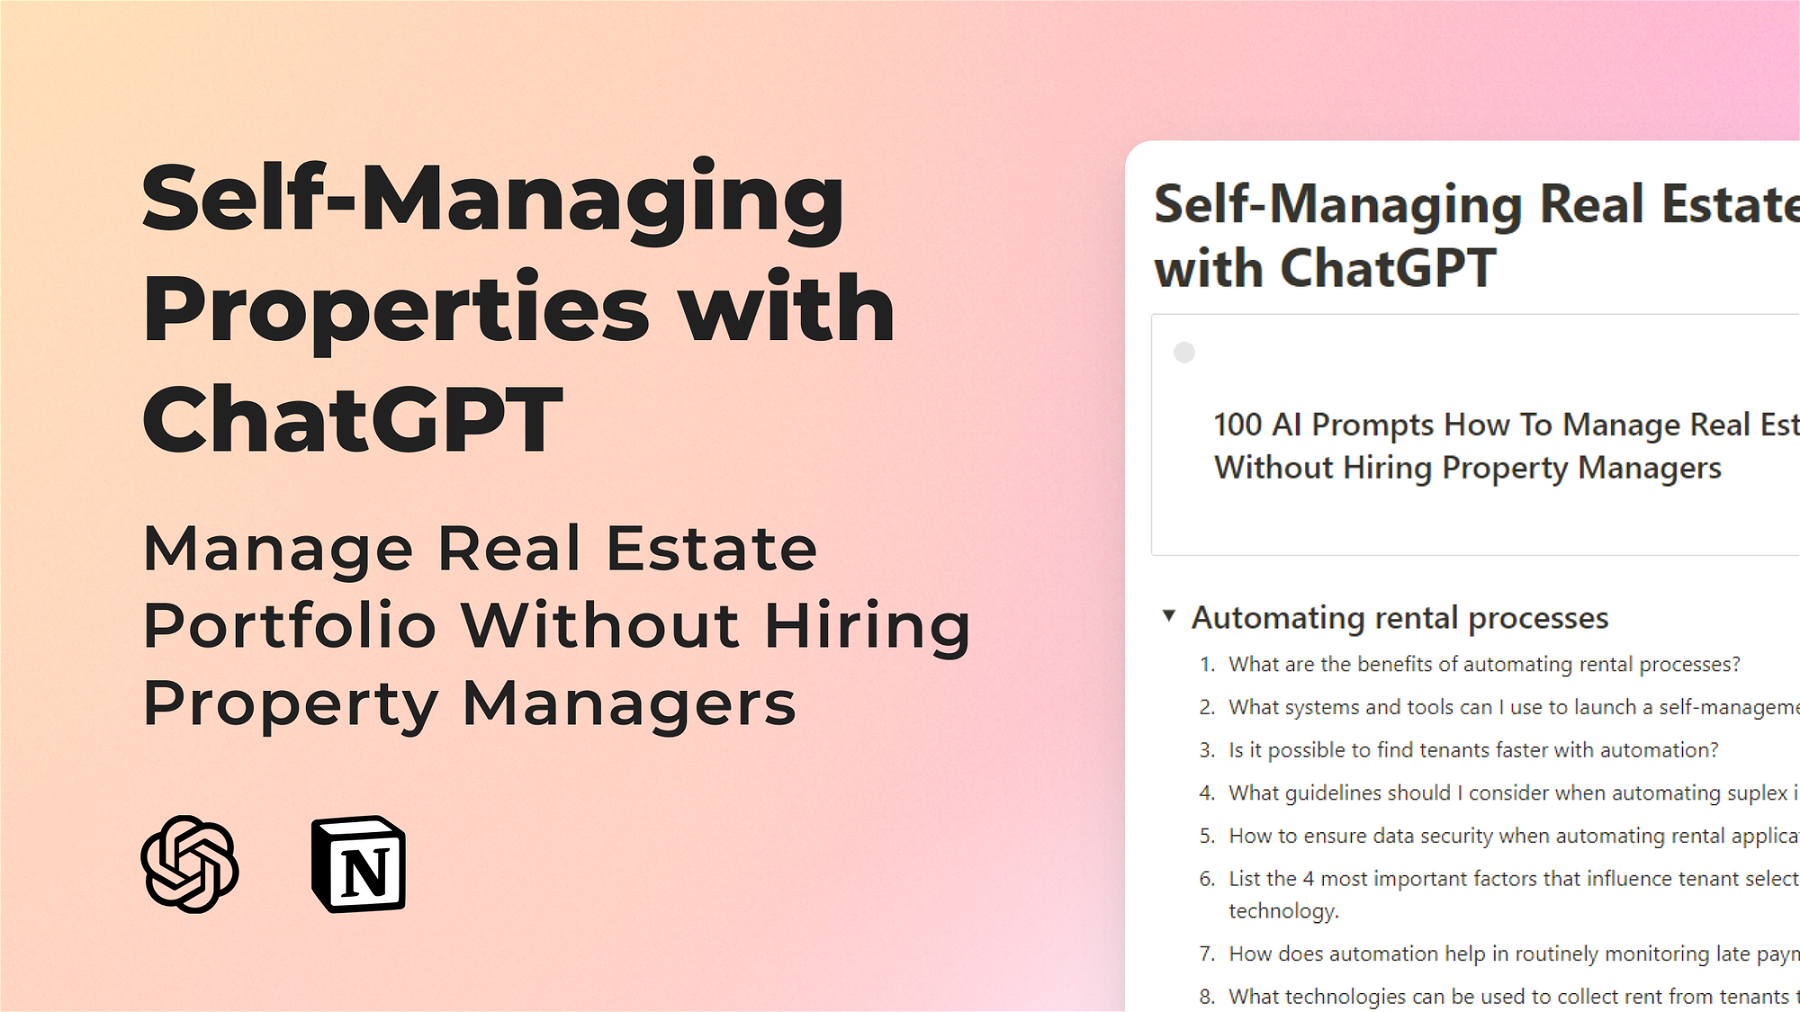 Self-Managing Properties with ChatGPT